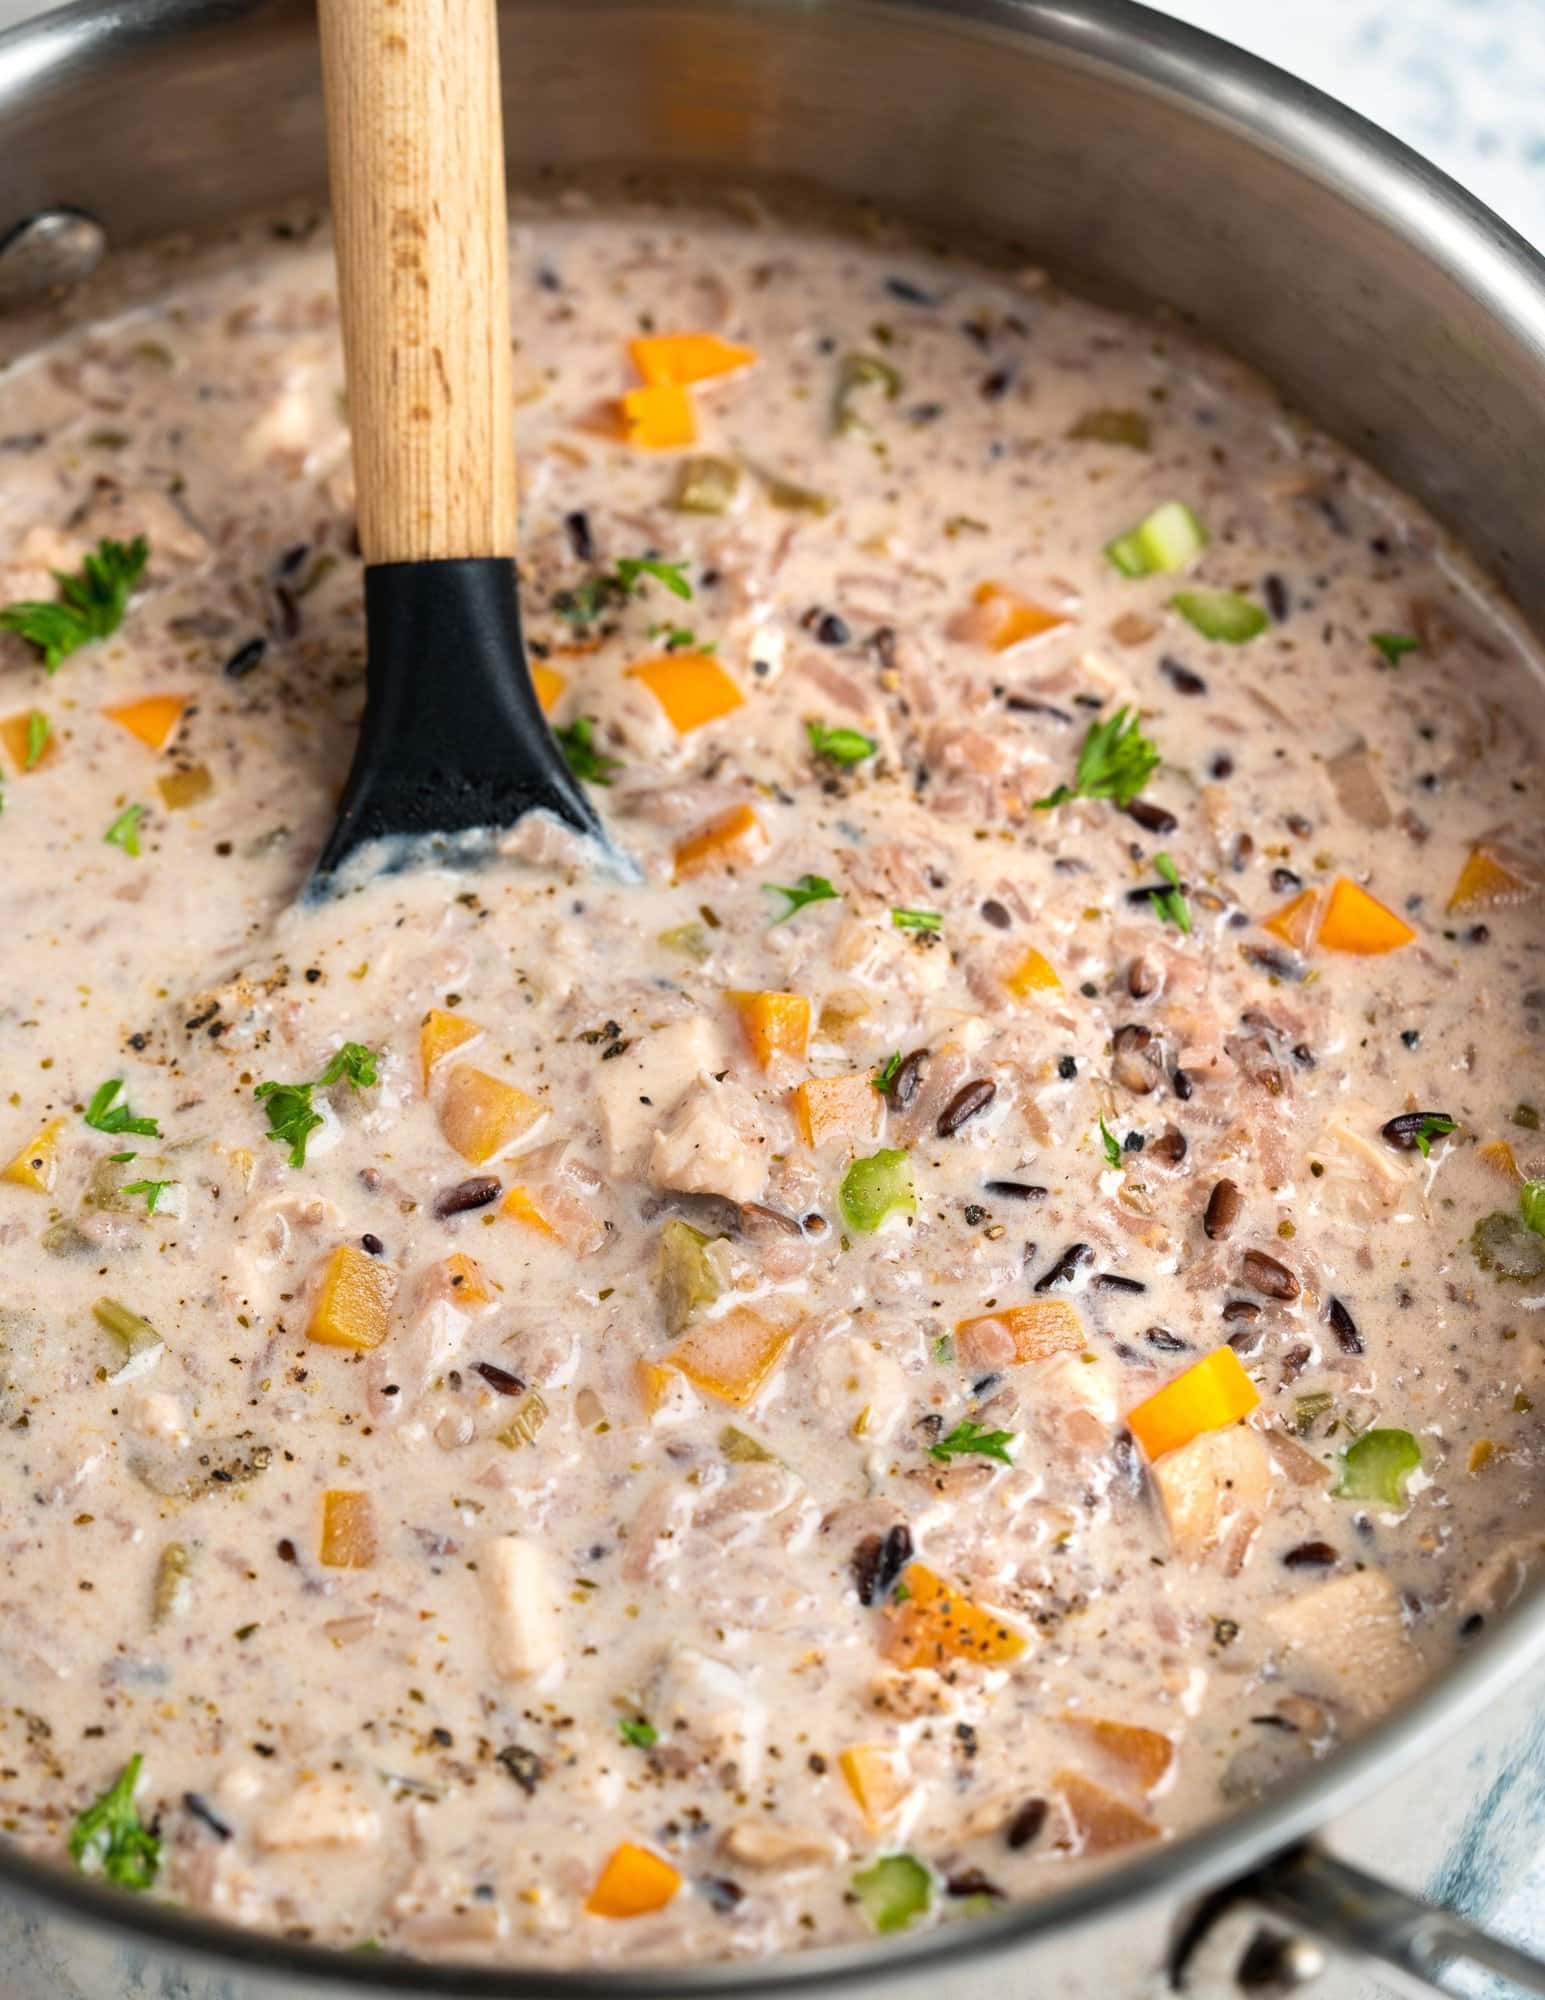 Pot of soup with flavorful wild rice cooked with chicken, mushrooms, chicken stock and vegetables shown with a ladle.